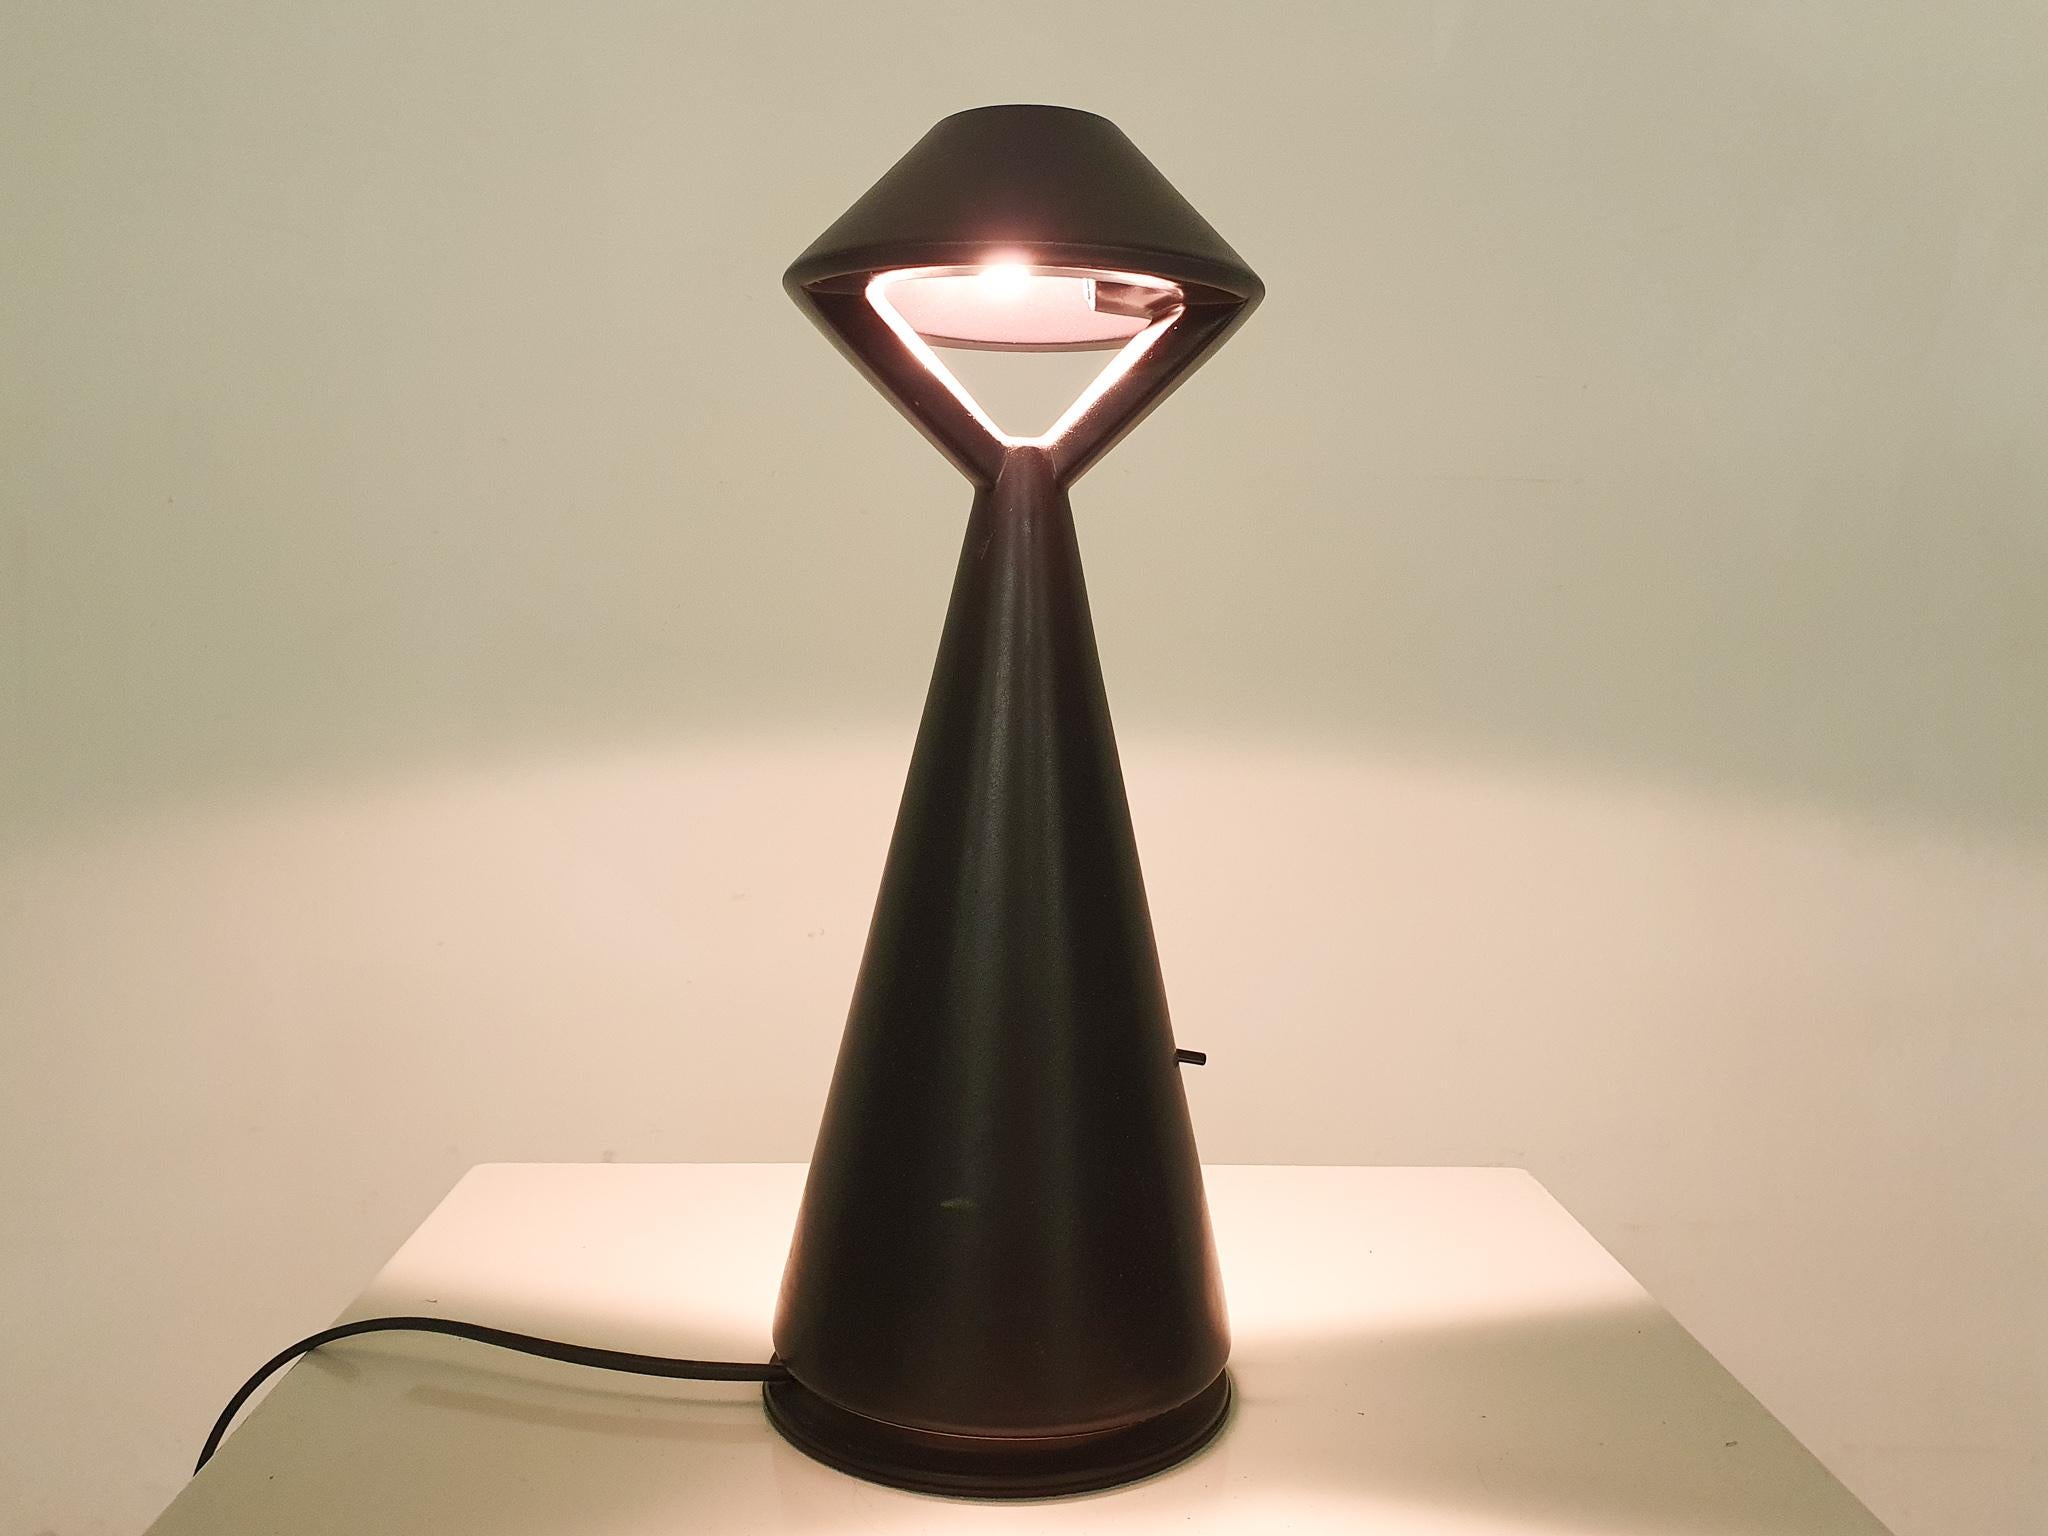 Black ceramic table or desk light with a small switch on the side. In good original condition.

